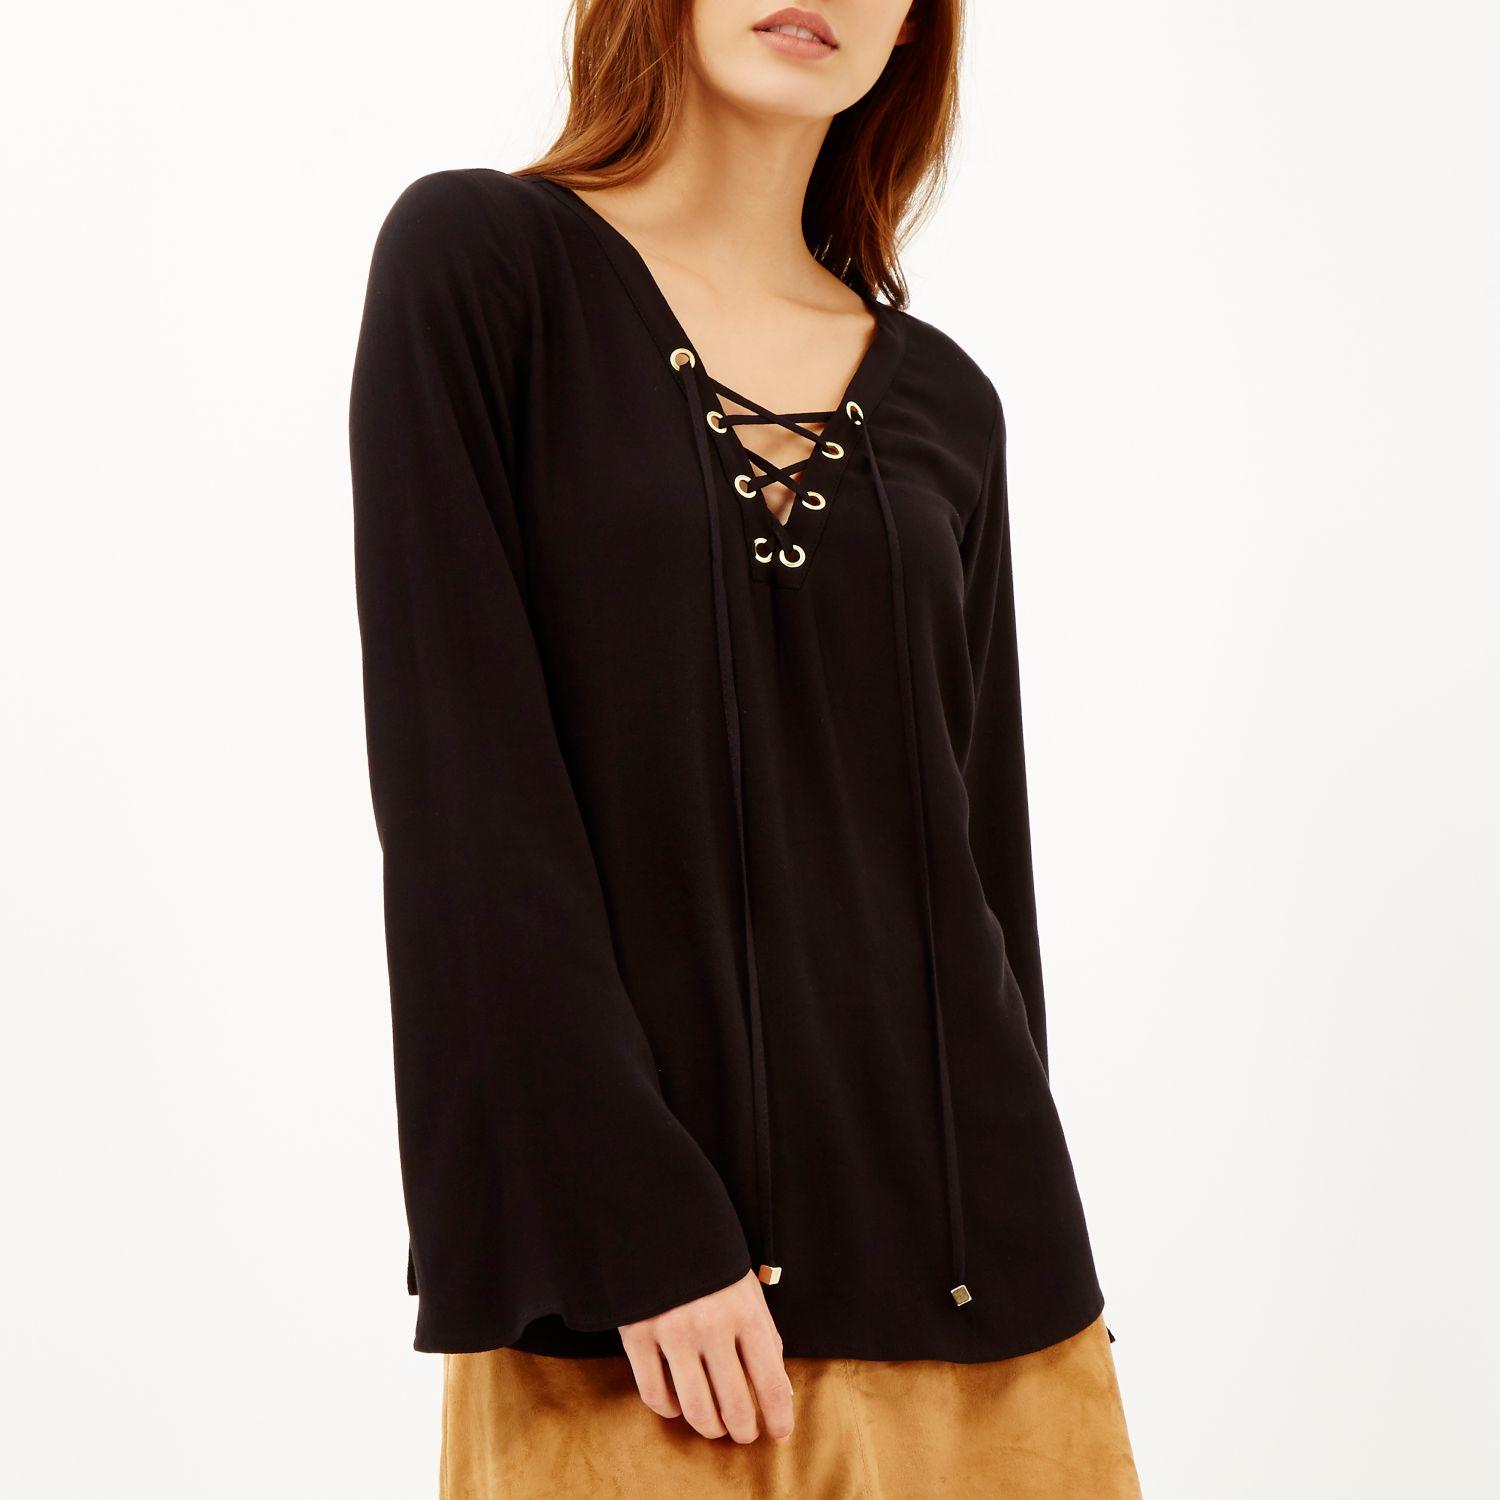 River Island Black Lace Up Eyelet Long Sleeve Top in Black - Lyst